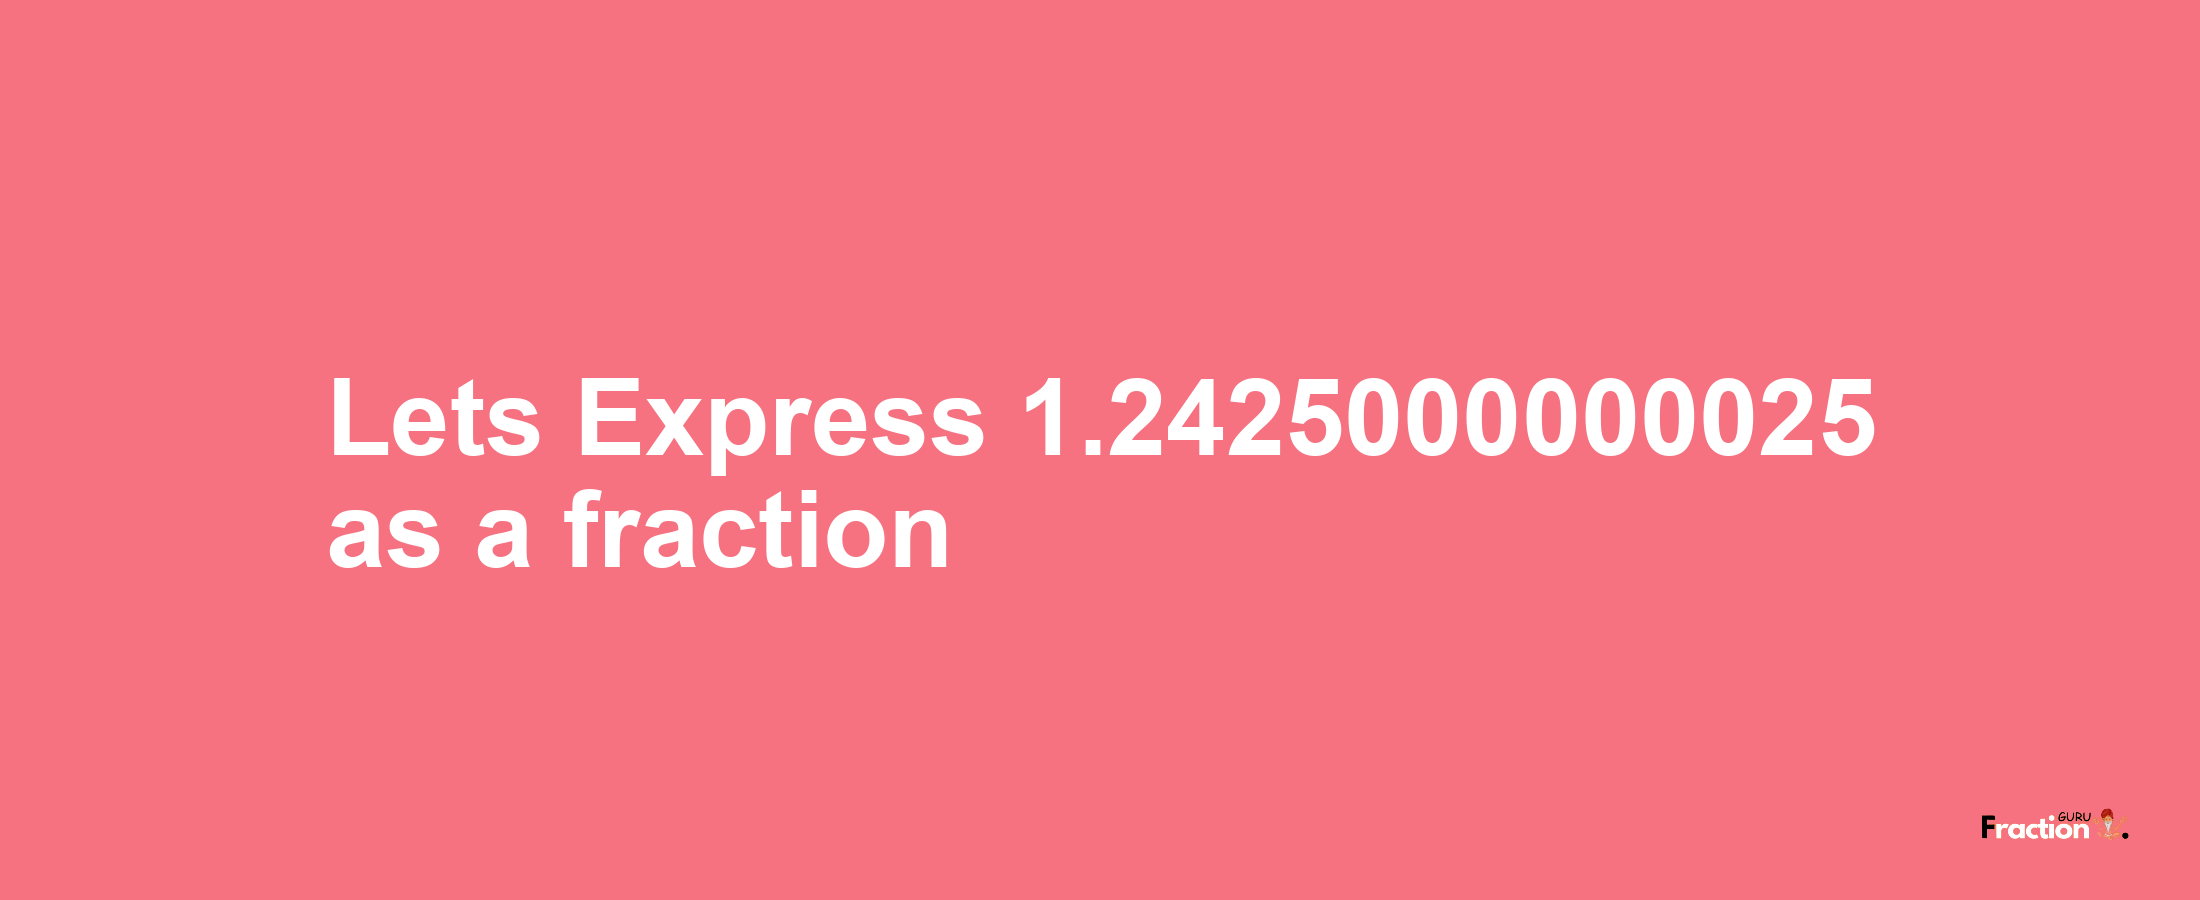 Lets Express 1.2425000000025 as afraction